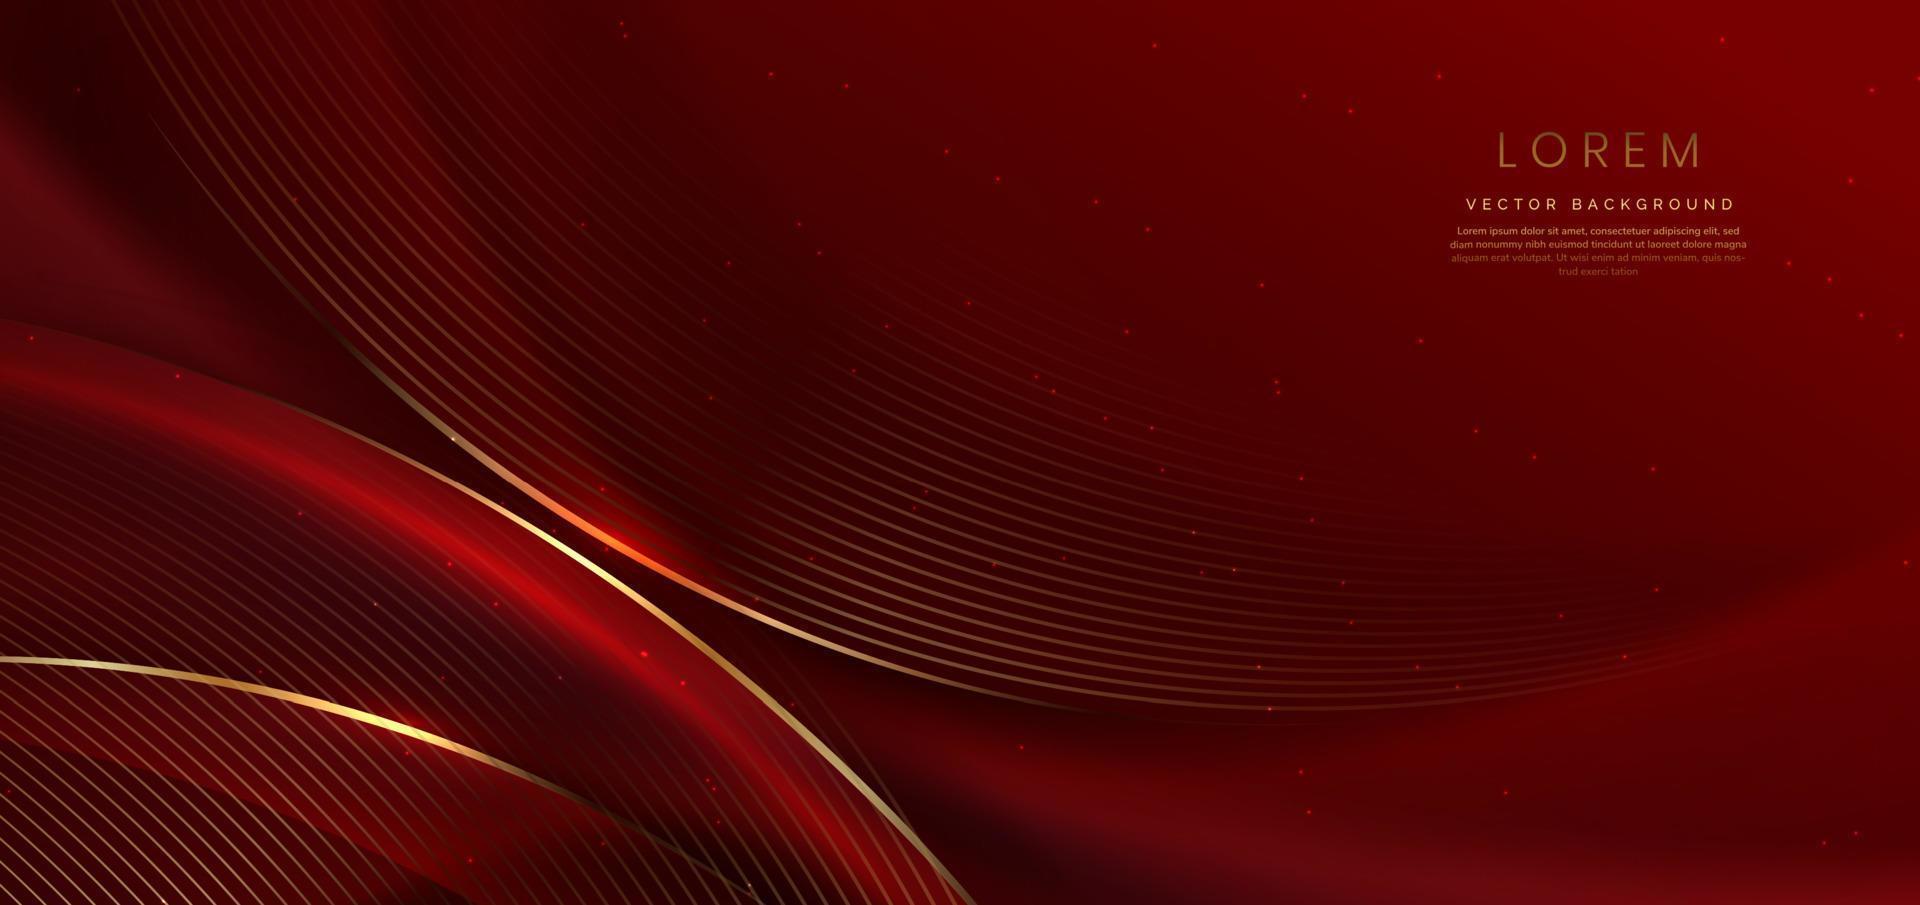 Abstract 3d curved red shape on red background with lighting effect and sparkle with copy space for text. Luxury design style. vector